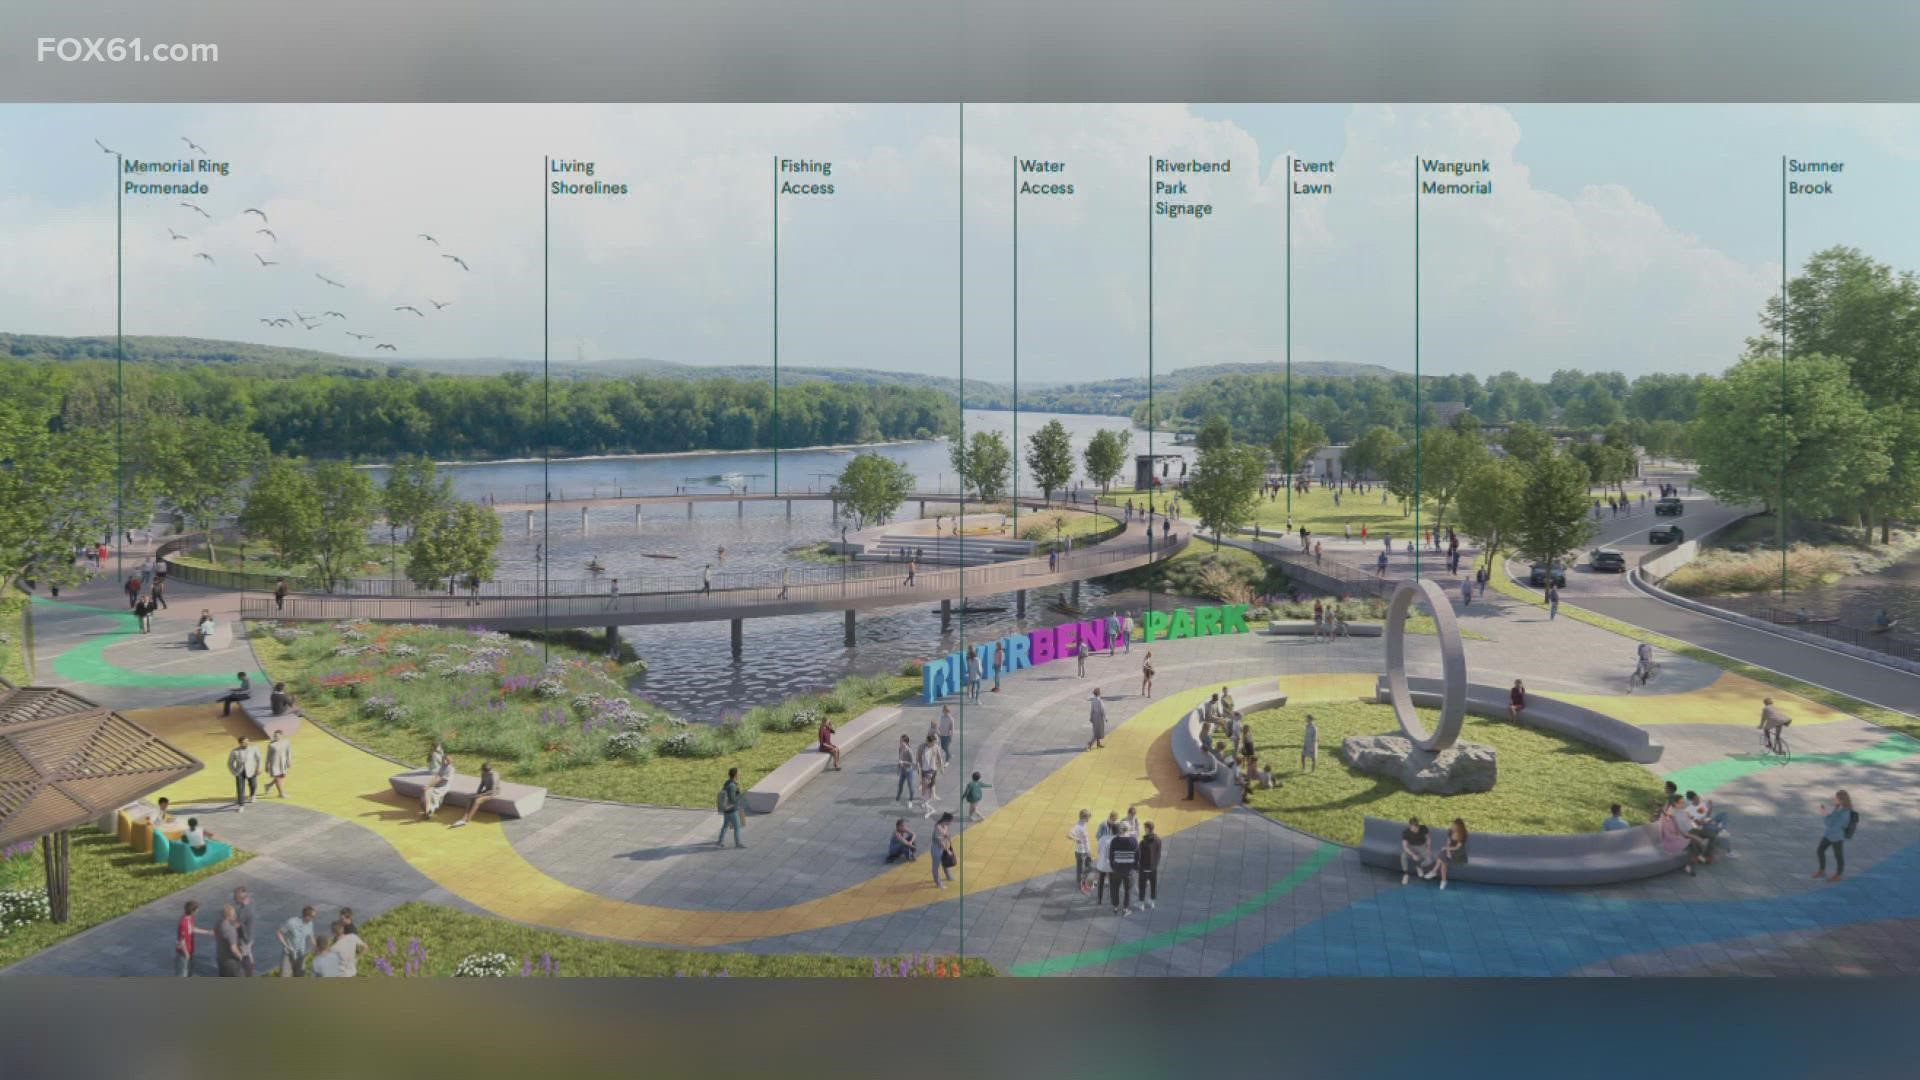 The city unveiled a master plan on Saturday for future growth and development along the Connecticut River.